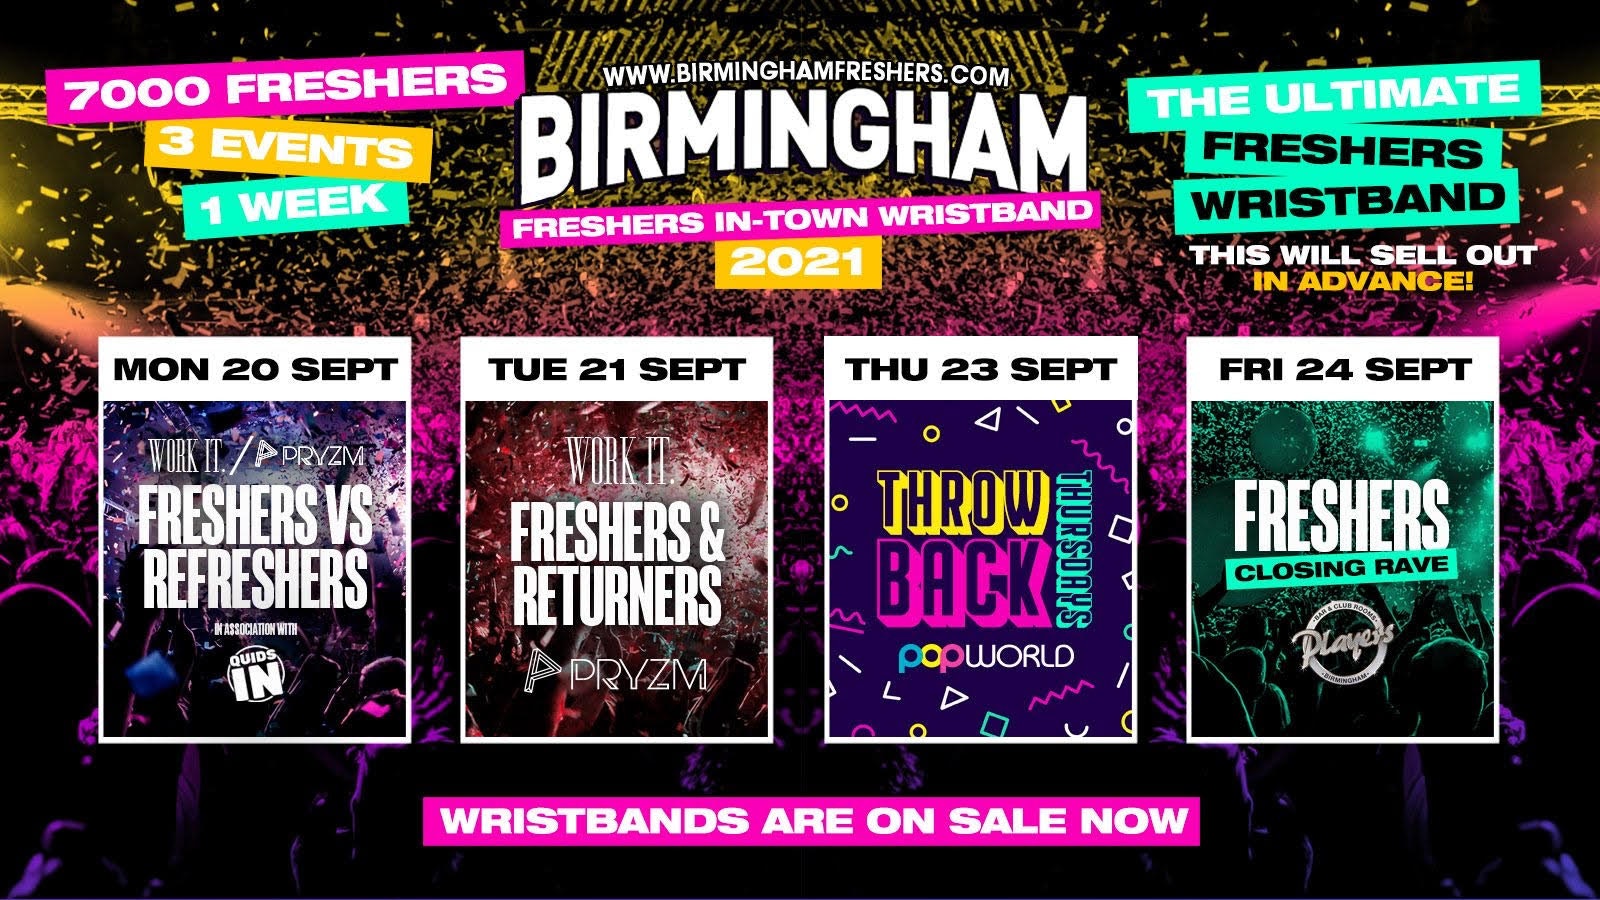 Birmingham Freshers Wristband 2021 – The Official Freshers Pass | Includes the biggest events in Birmingham